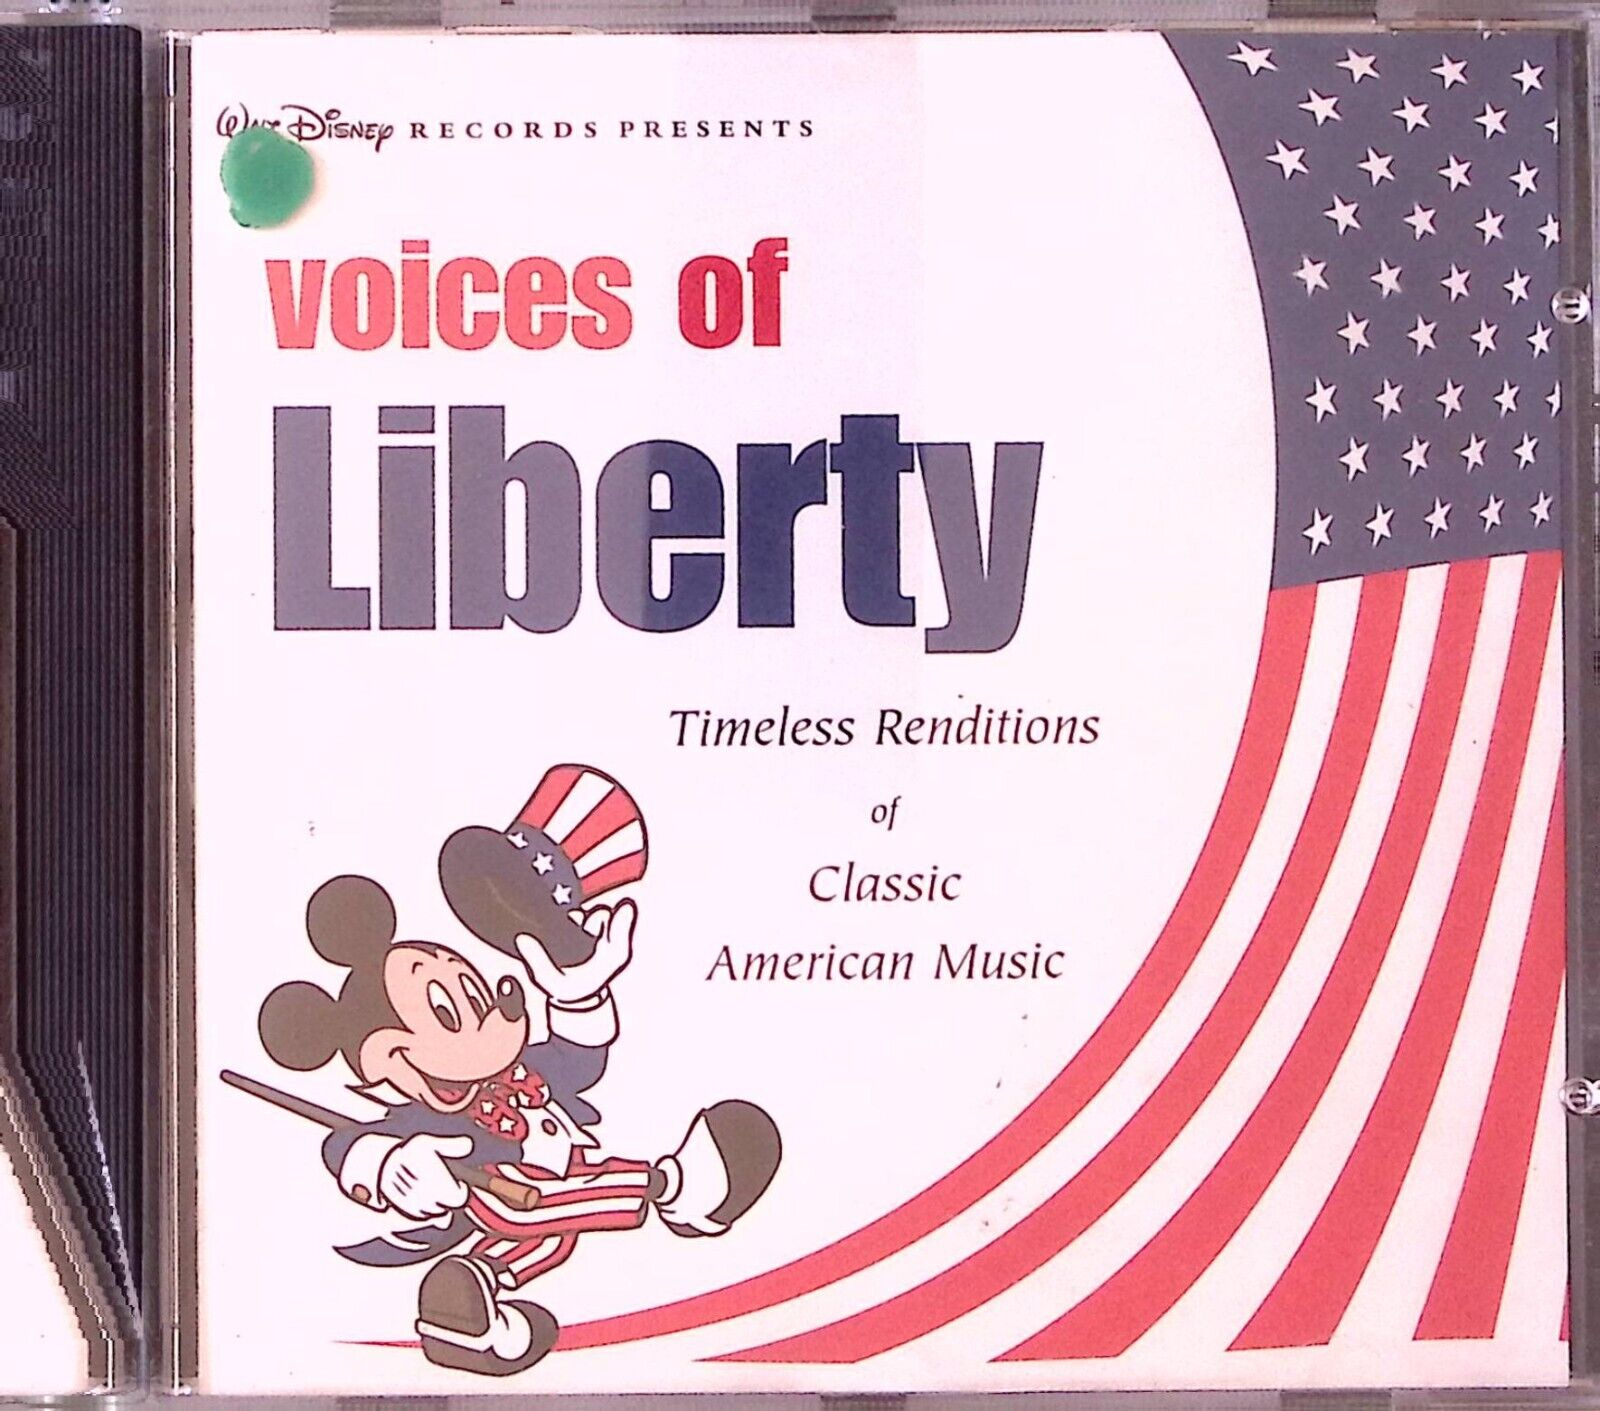 WALT DISNEY RECORDS PRESENTS VOICES OF LIBERTY CLASSIC AMERICAN MUSIC CD 2529